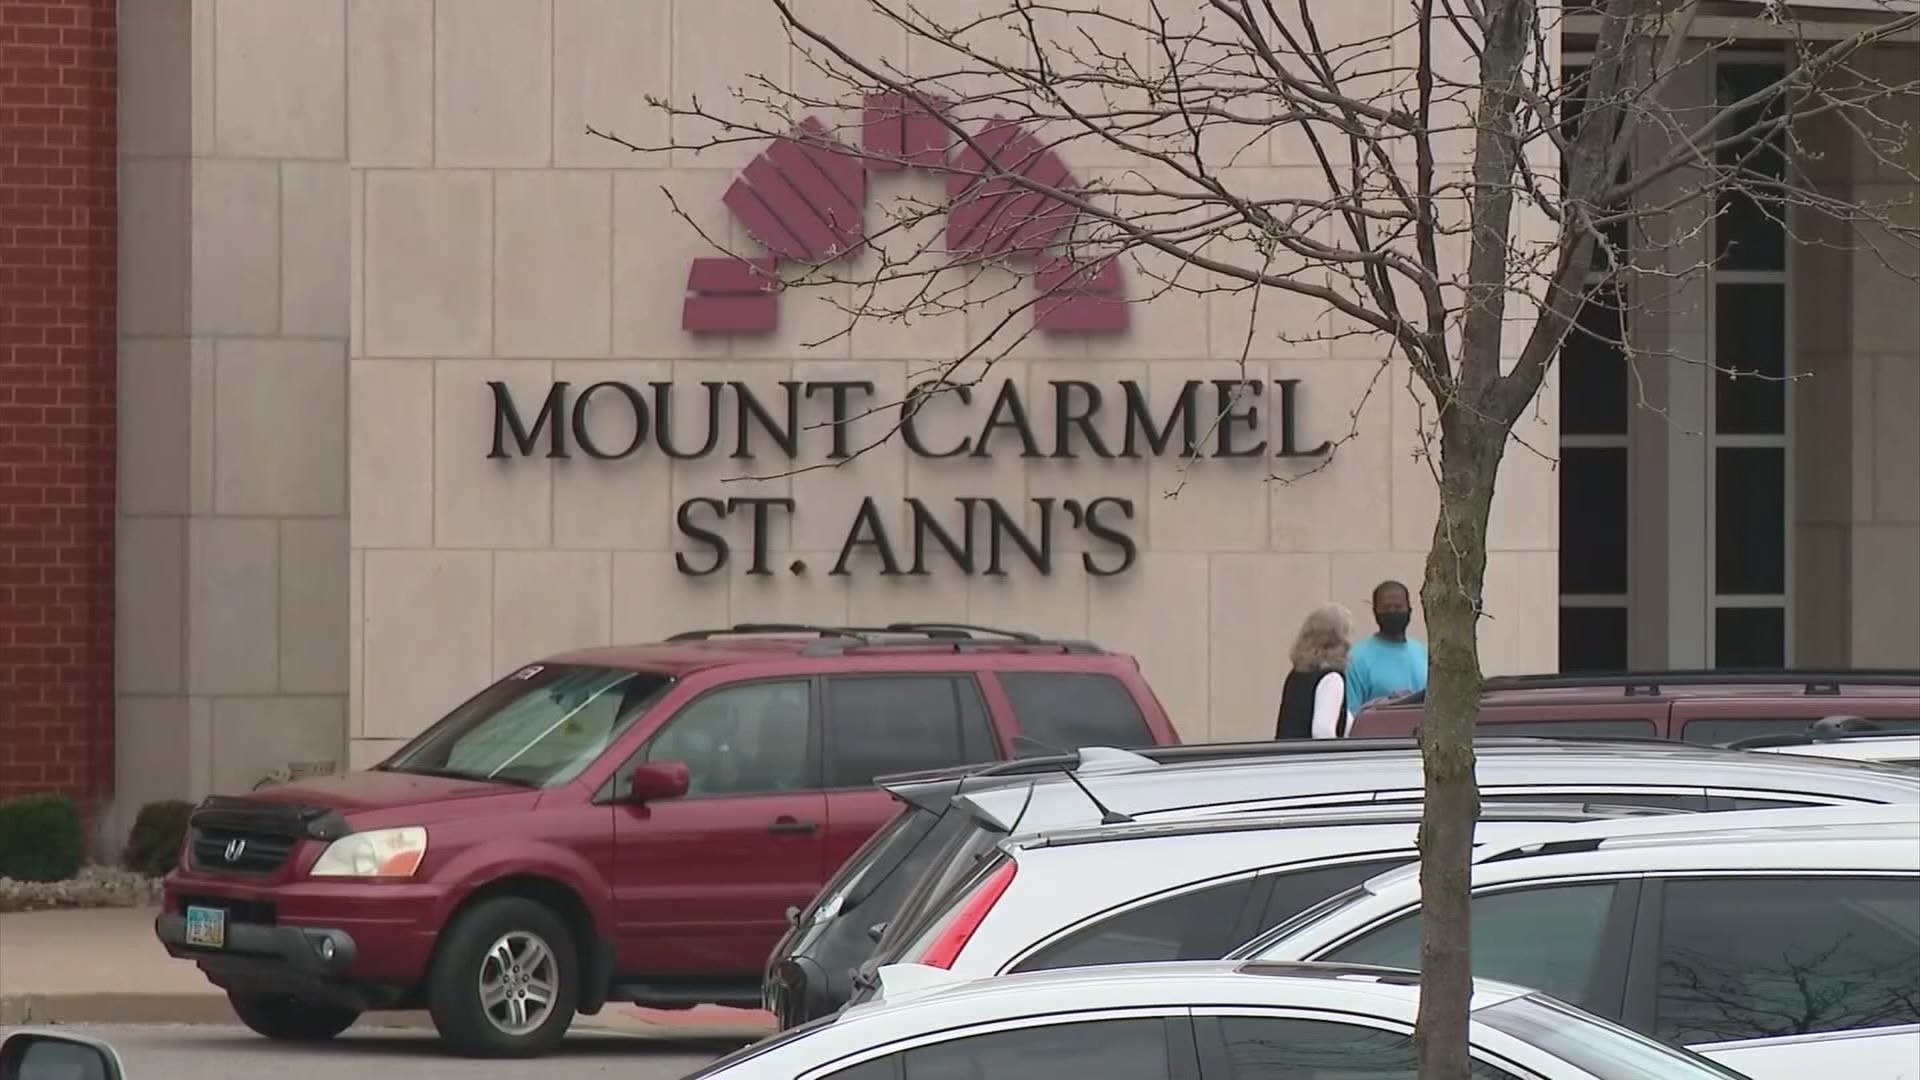 People inside of Mount Carmel St. Ann's went into lockdown when shots were fired. A man was killed after an exchange of gunfire with police and hospital security.